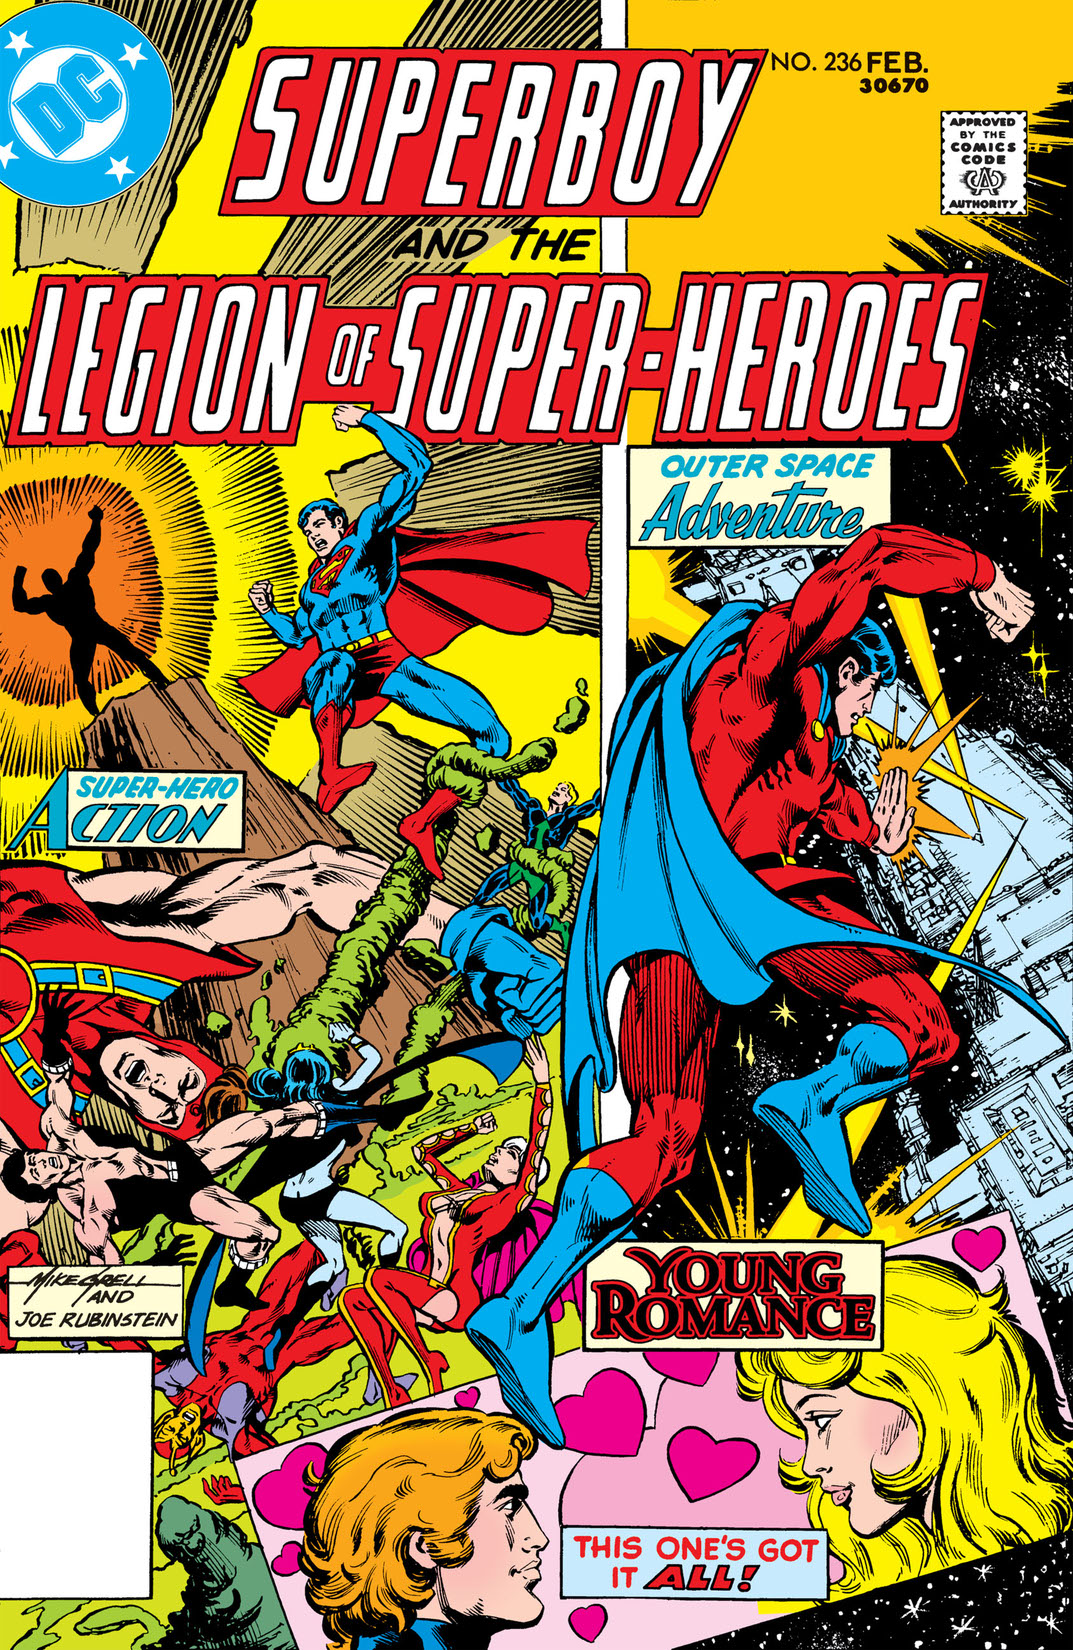 Superboy and the Legion of Super-Heroes (1977-) #236 preview images